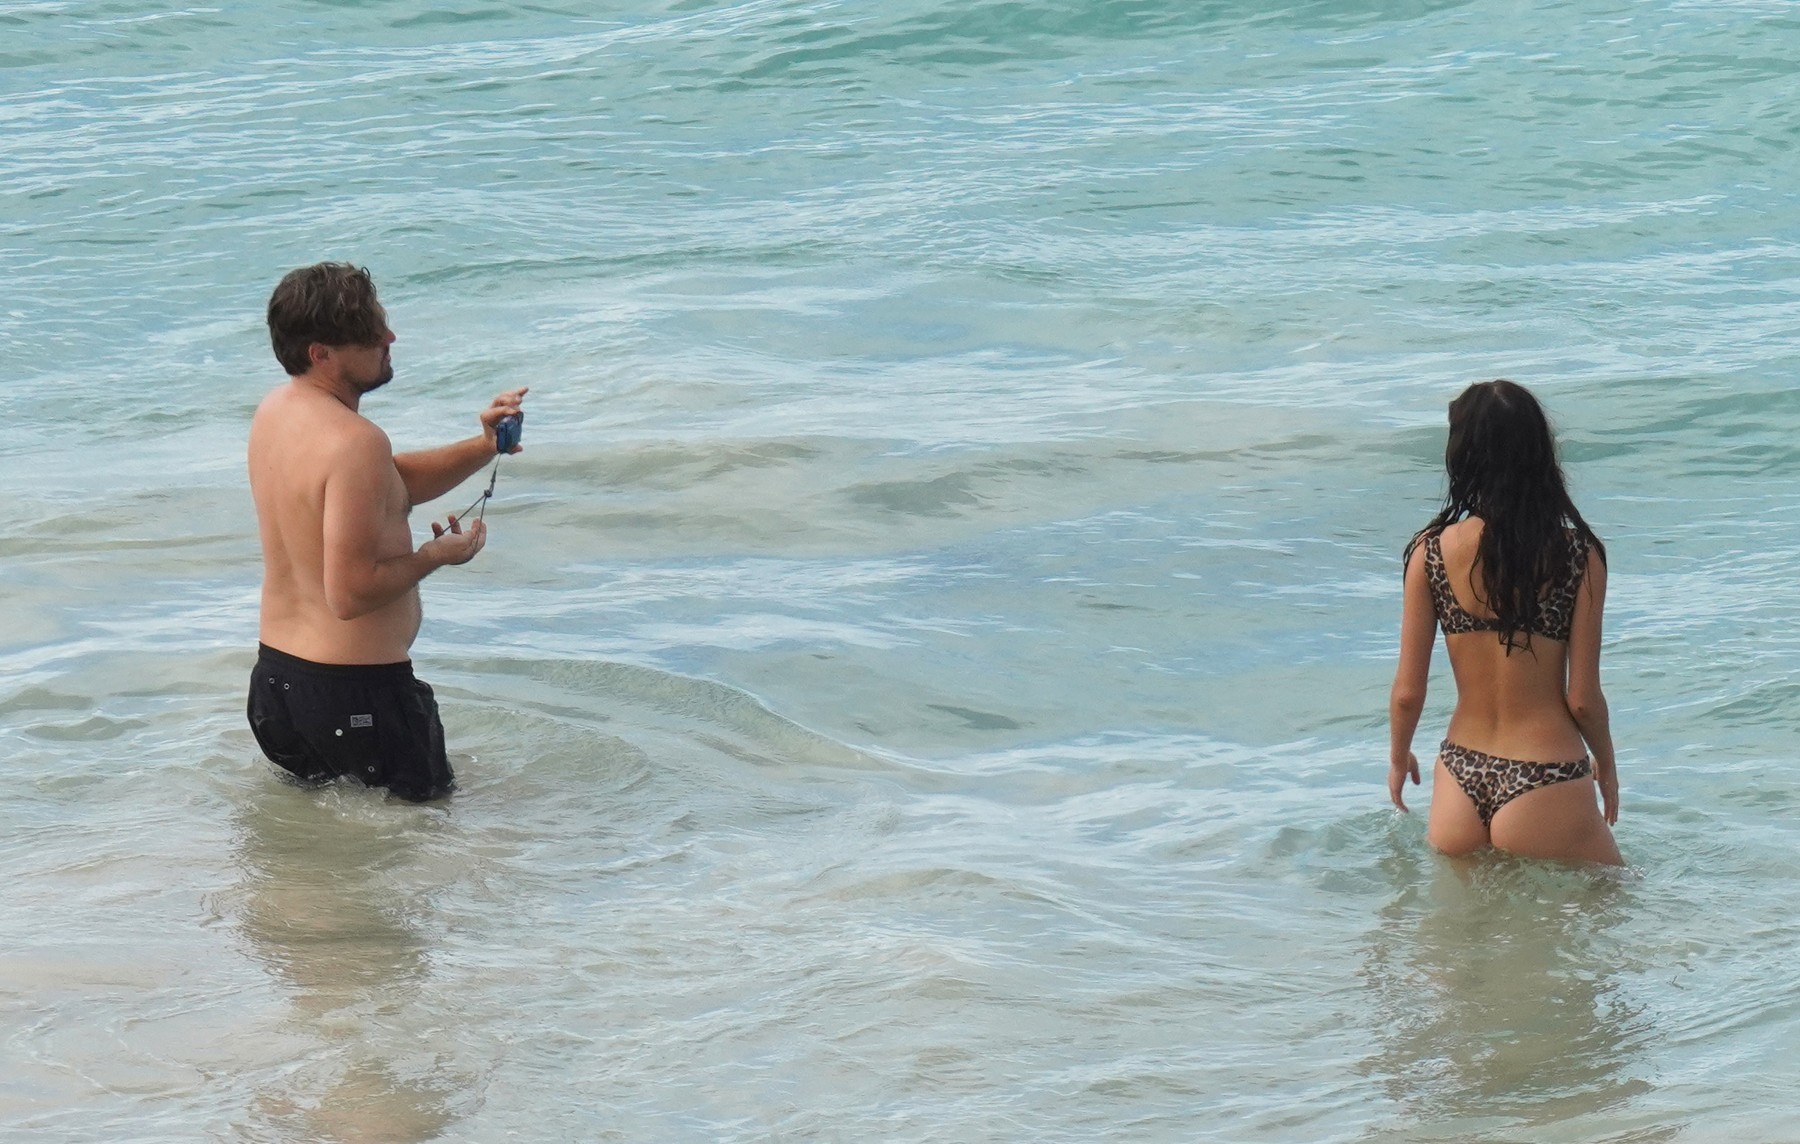 EXCLUSIVE PICTURES. IN POOL WITH ELIOT PRESS AND BACKGRID PHOTOGRAPHER. PLEASE CONTACT LOCAL AGENTS TO KEEP EXCLUSIVE.

THIS SET IS POOL.

Leonardo DiCaprio and Camila Morrone enjoy their holiday with a day at the beach on December 31st 2019 in St Barts., Image: 490785948, License: Rights-managed, Restrictions: , Model Release: no, Credit line: IMP Features / IMP Features / Profimedia